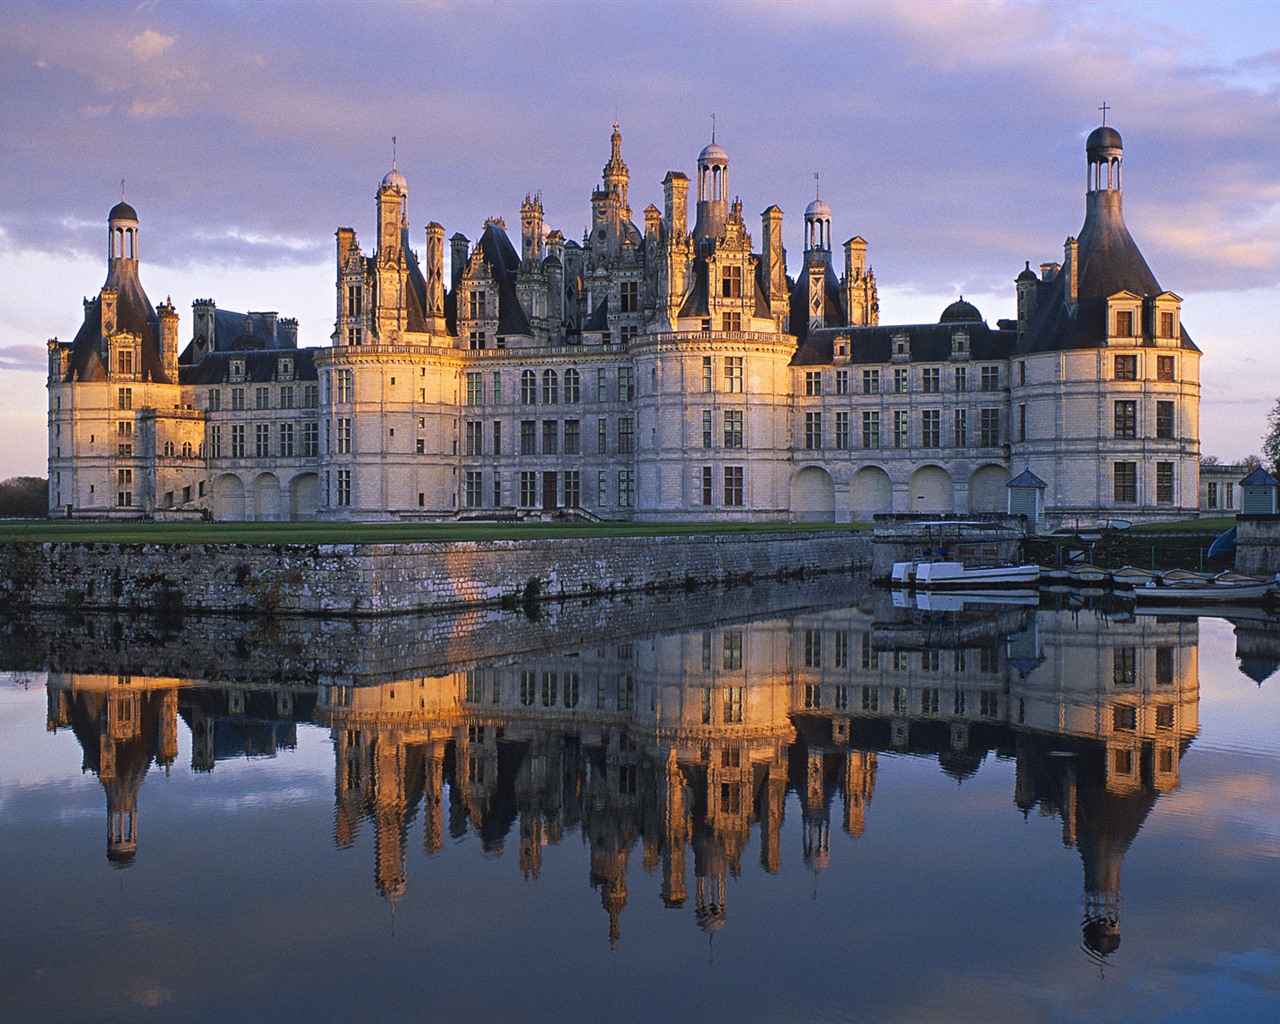 Windows 7 Wallpapers: Castles of Europe #15 - 1280x1024